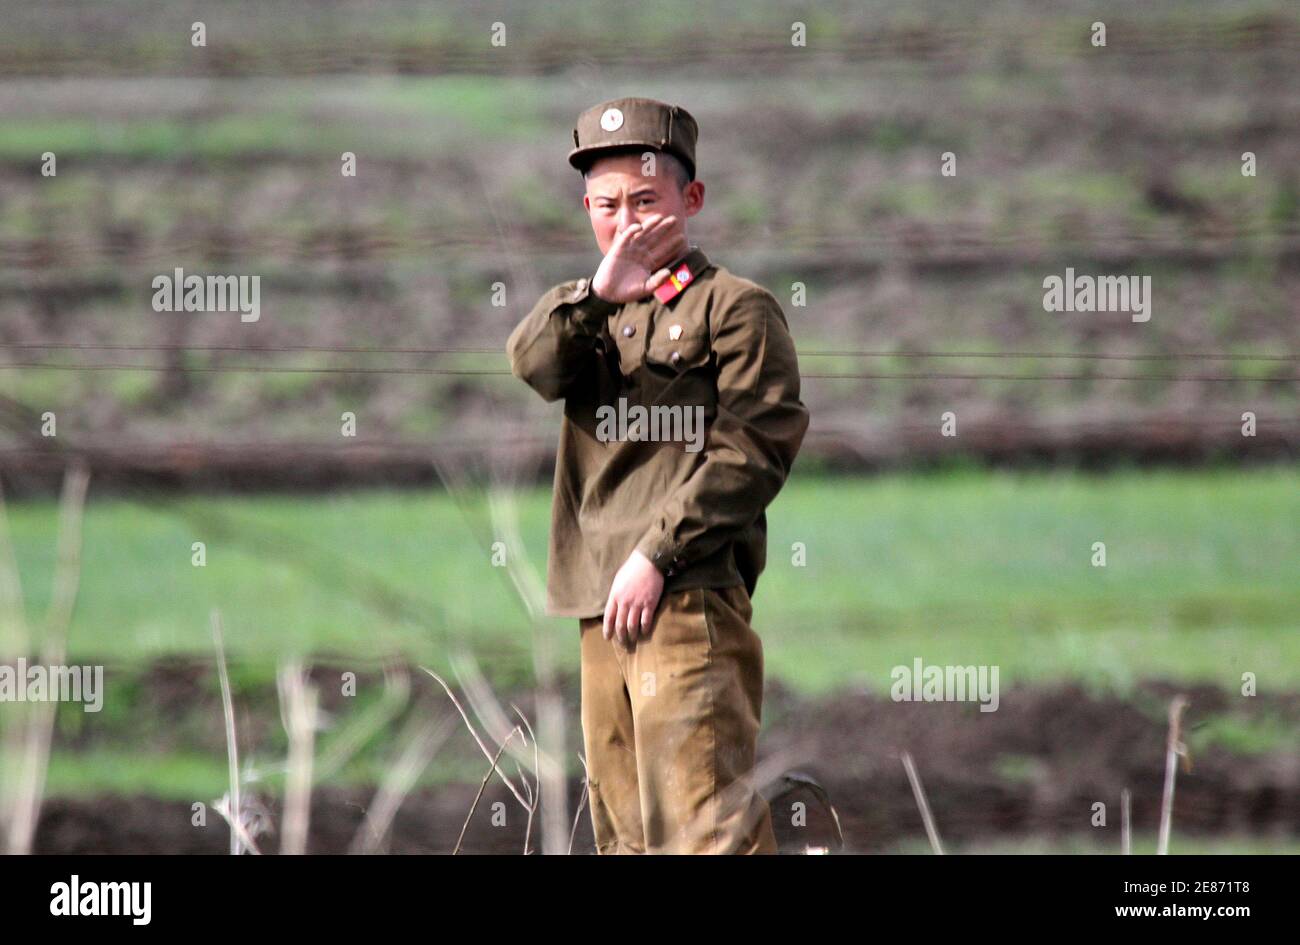 A North Korean soldier gestures while guarding the banks of the Yalu River near the North Korean town of Sinuiju May 25, 2010. North Korean leader Kim Jong-il has told his military it may have to go to war but only if the South attacks first, according to the South Korea-based news agency Yonhap that monitors the hermit state.     REUTERS/Jacky Chen (NORTH KOREA - Tags: MILITARY POLITICS) Stock Photo